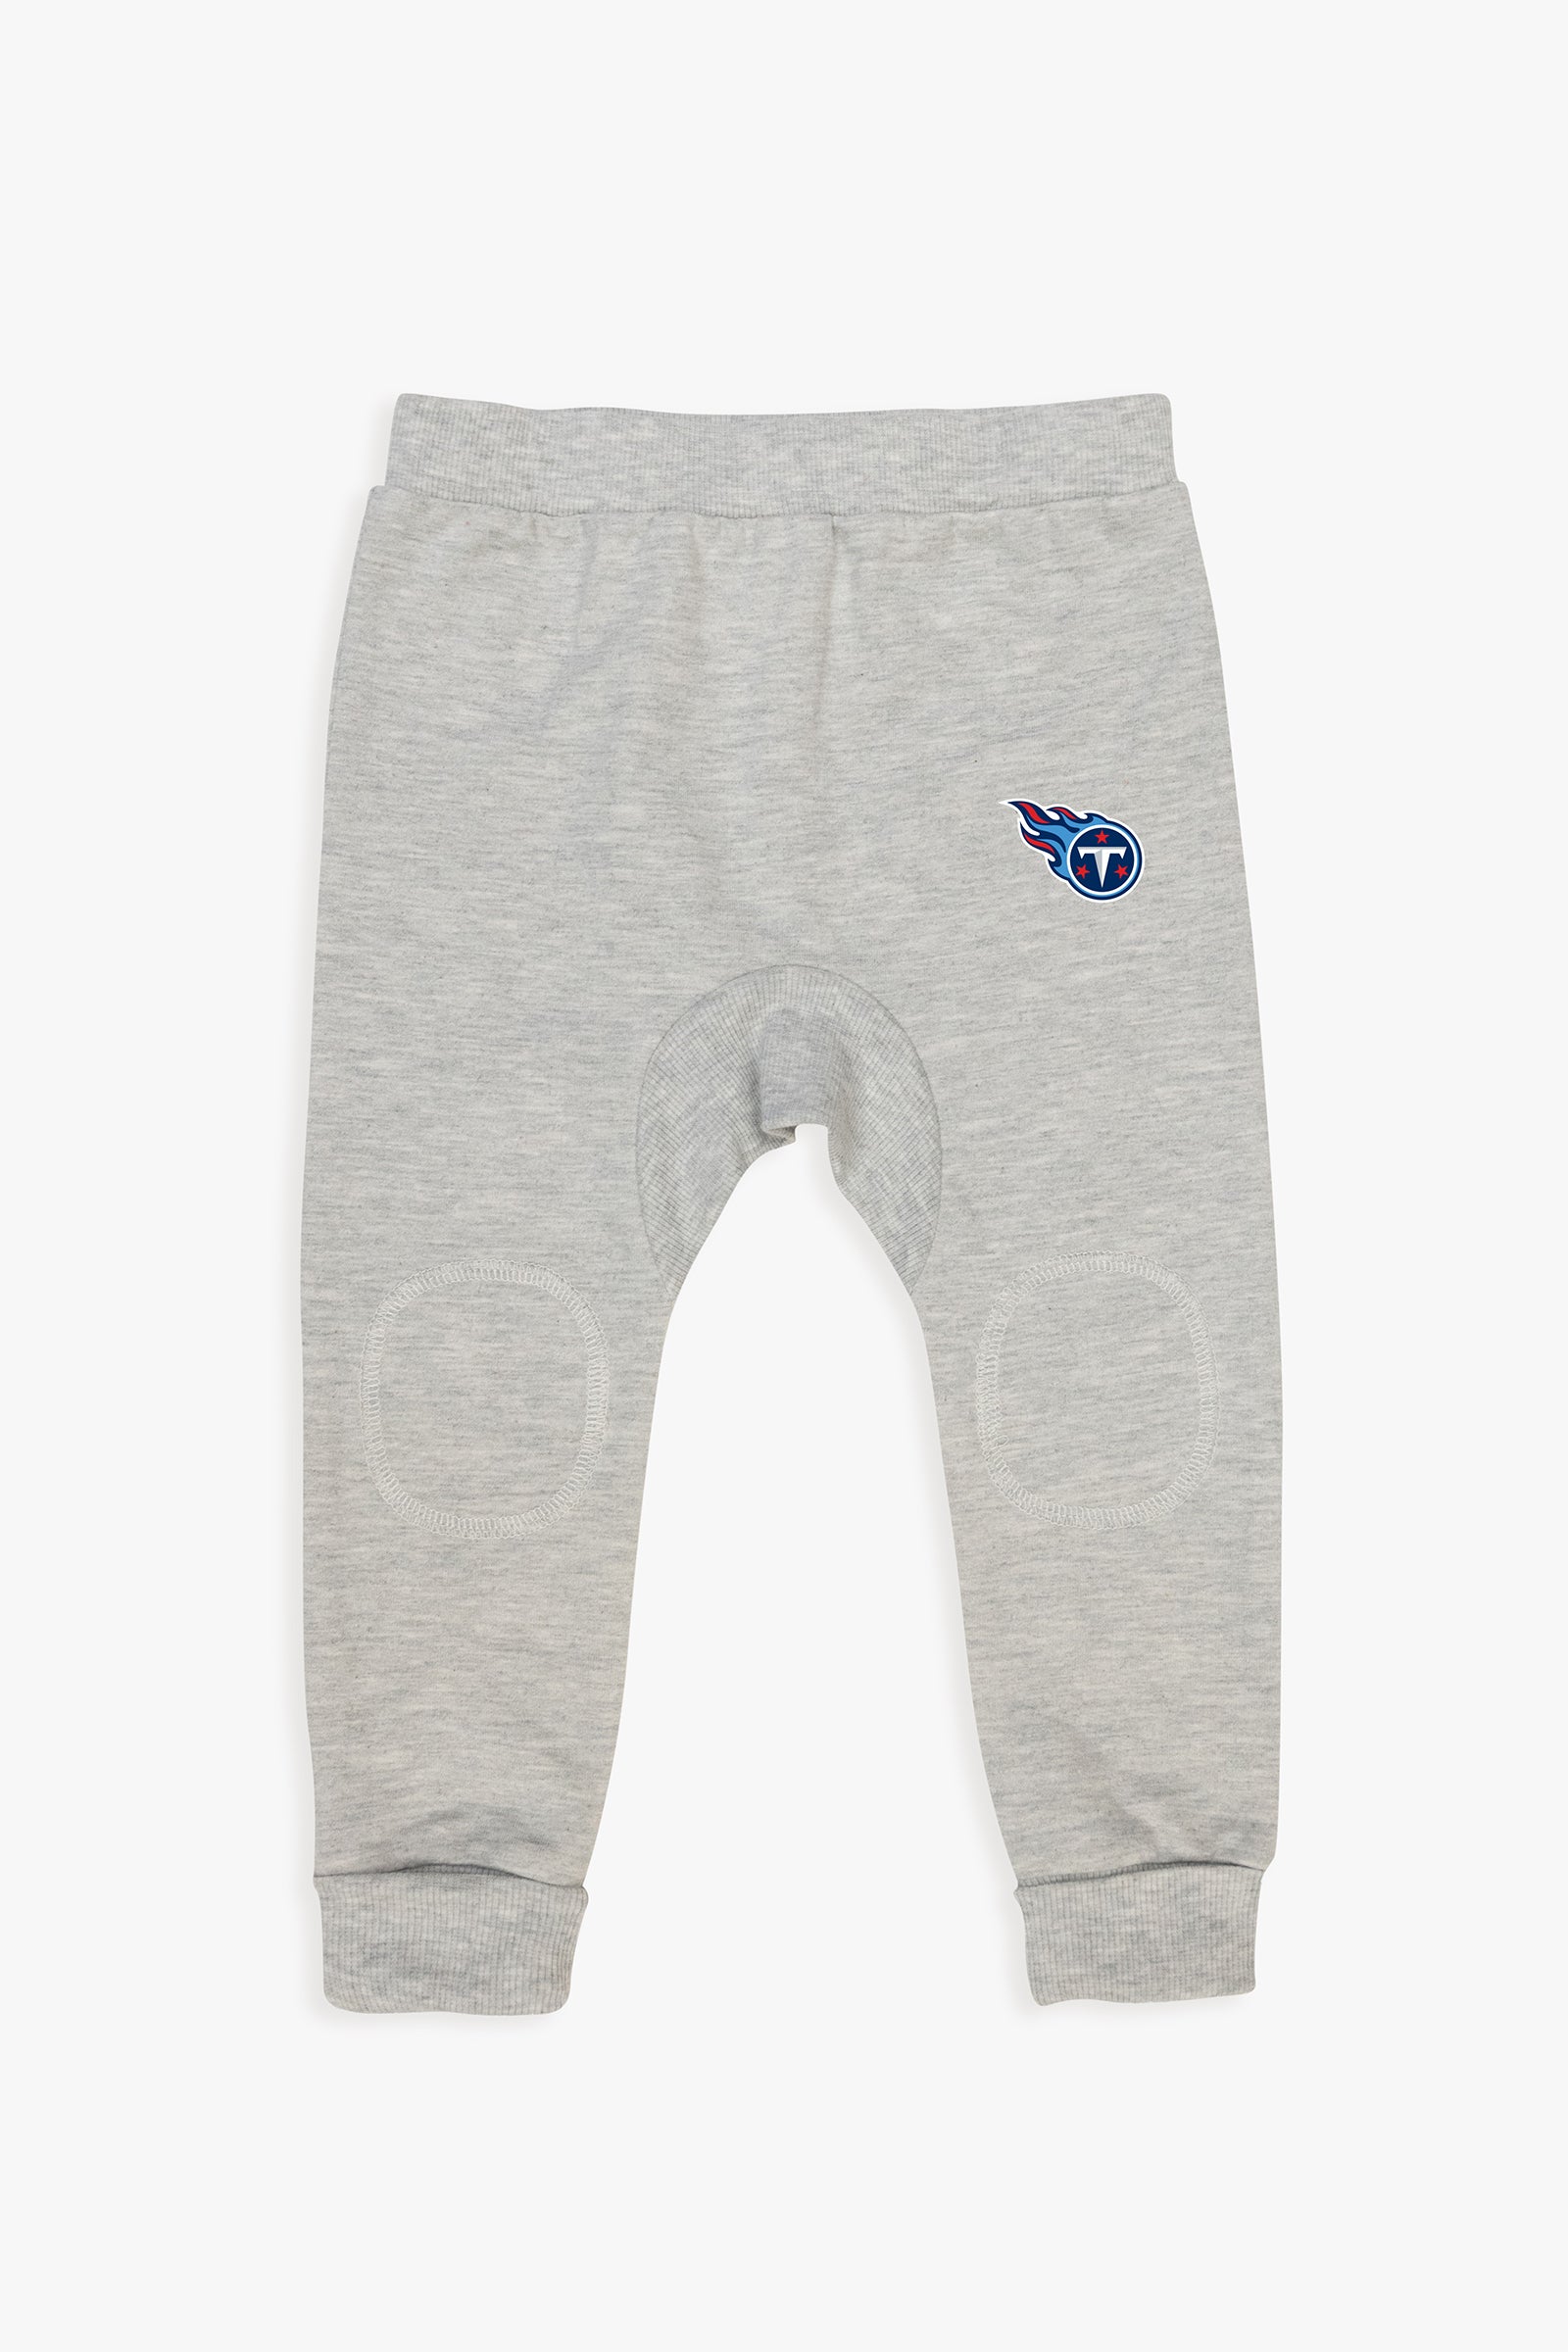 Gertex NFL Toddler Grey French Terry Pants